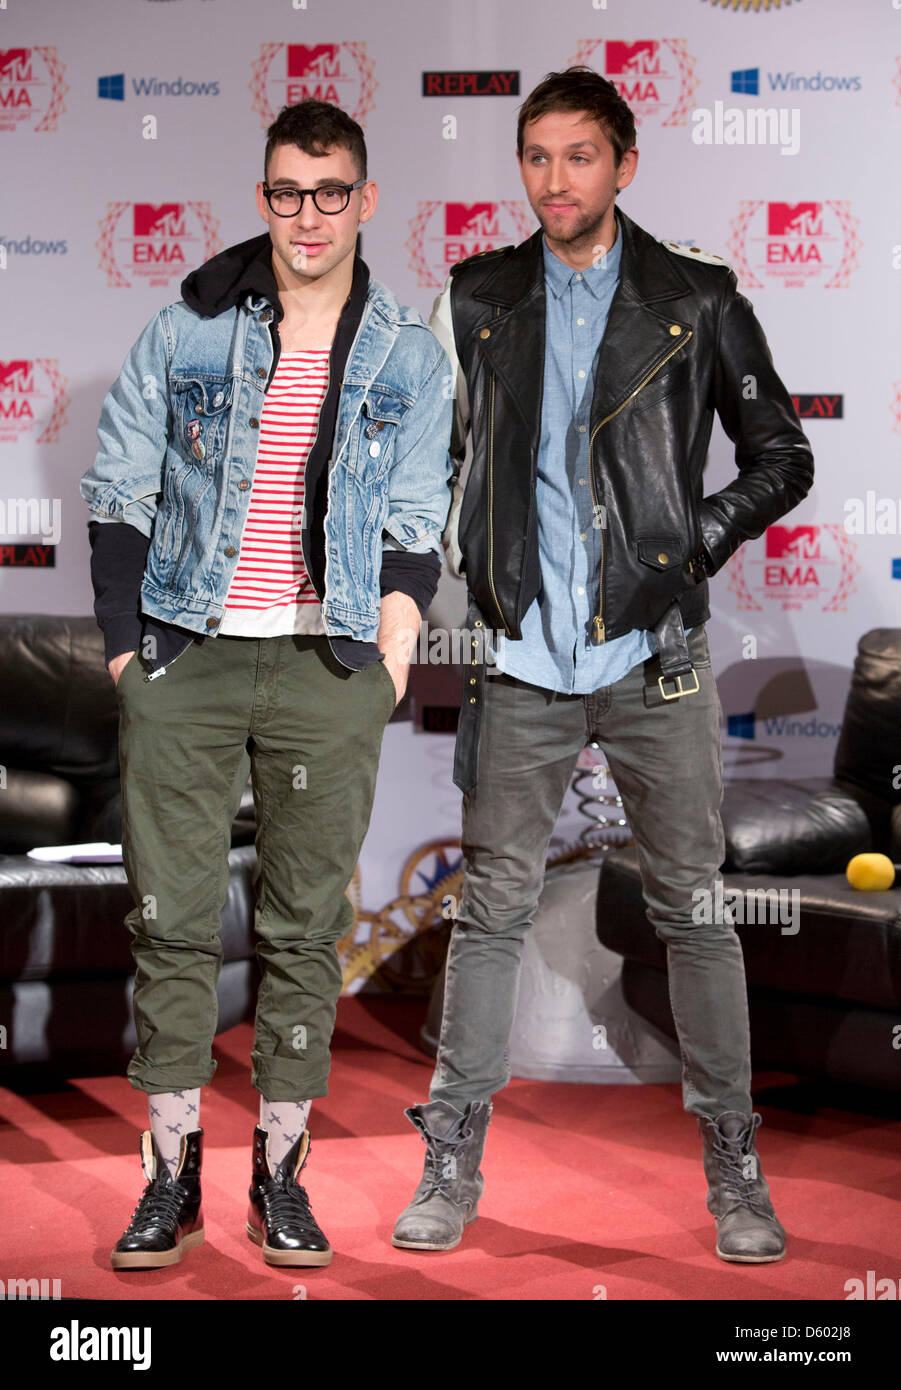 Jack Antonoff and Andrew Dost (R) from the American indie pop band Fun pose  during the MTV press conference in Frankfurt, Germany, 10 november 2012.  The MTV European Music awards show will